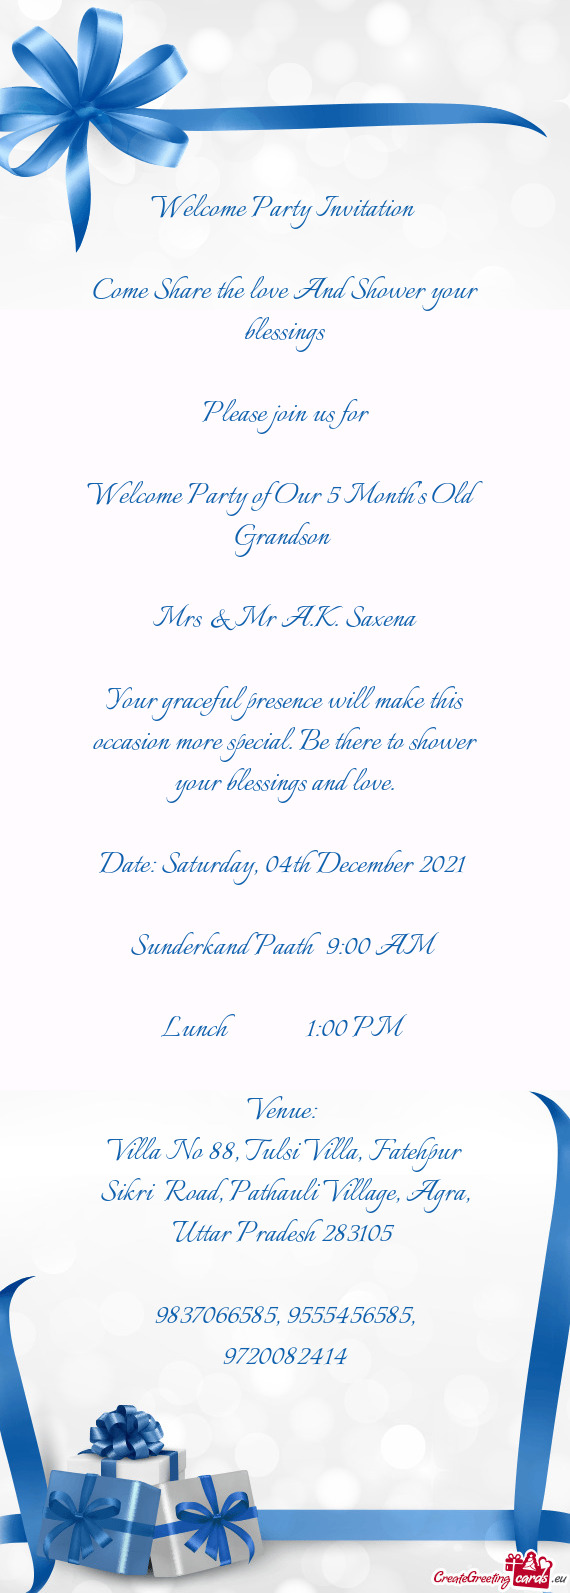 Your graceful presence will make this occasion more special. Be there to shower your blessings and l